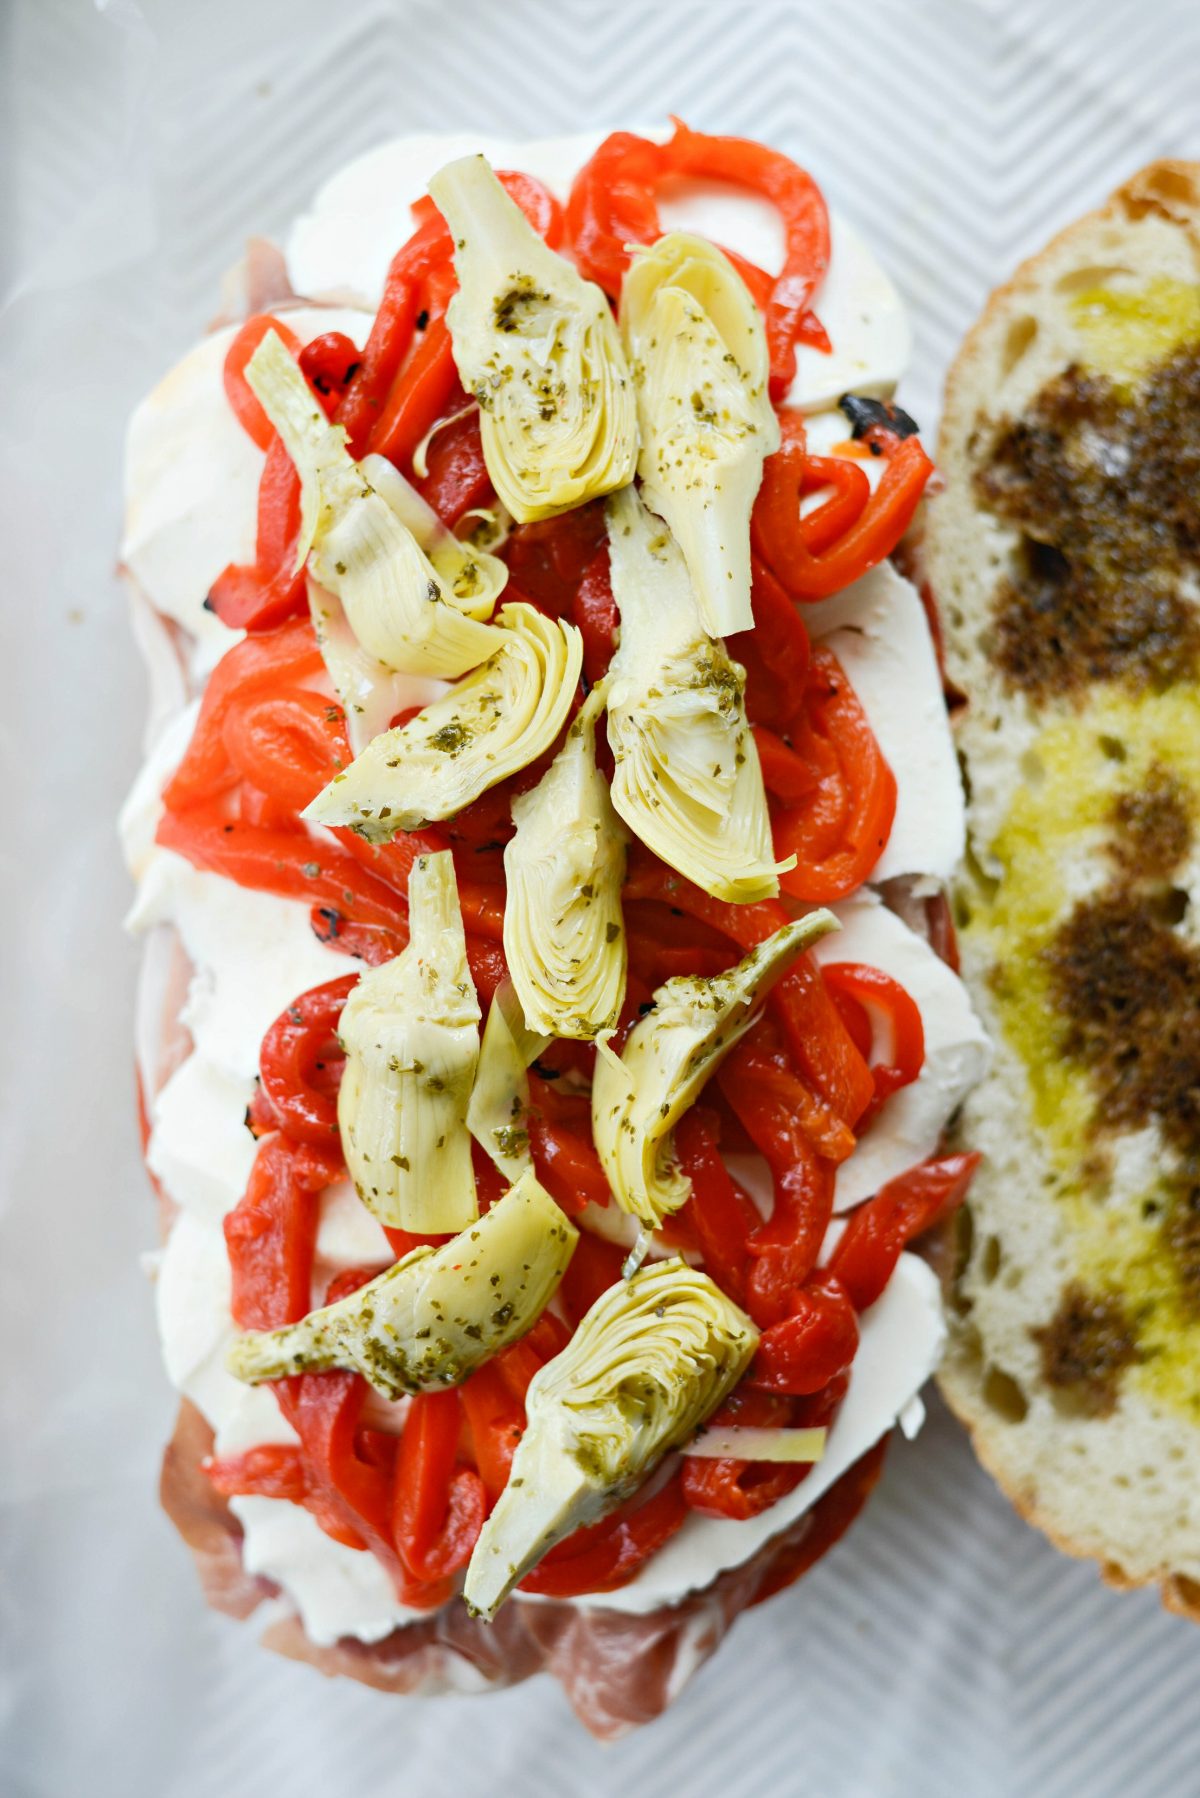 mozzarella, roasted red peppers and marinated artichokes